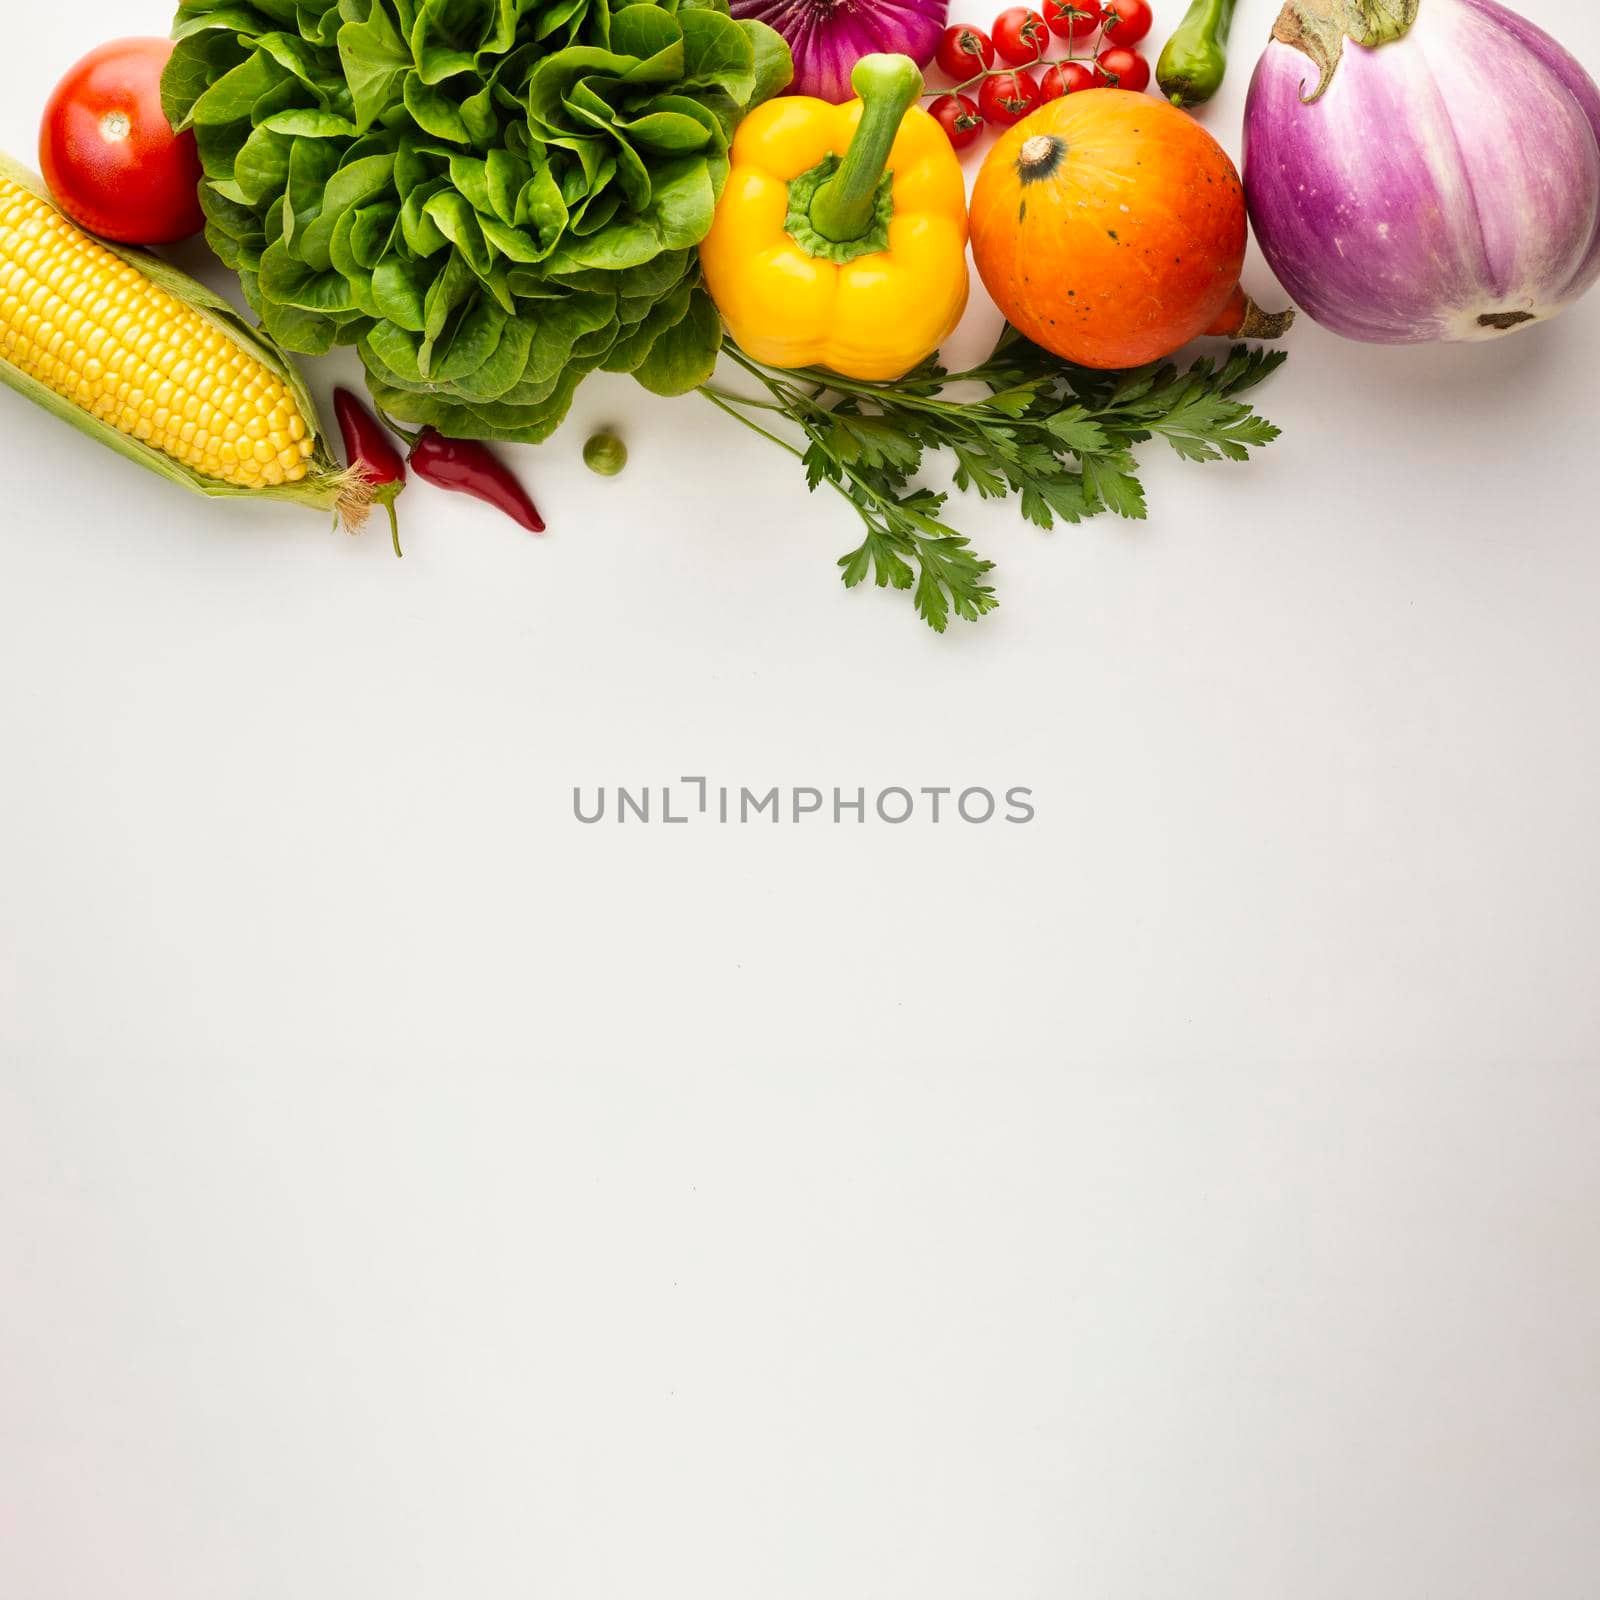 healthy vegetables full vitamins with copy space. High quality photo by Zahard